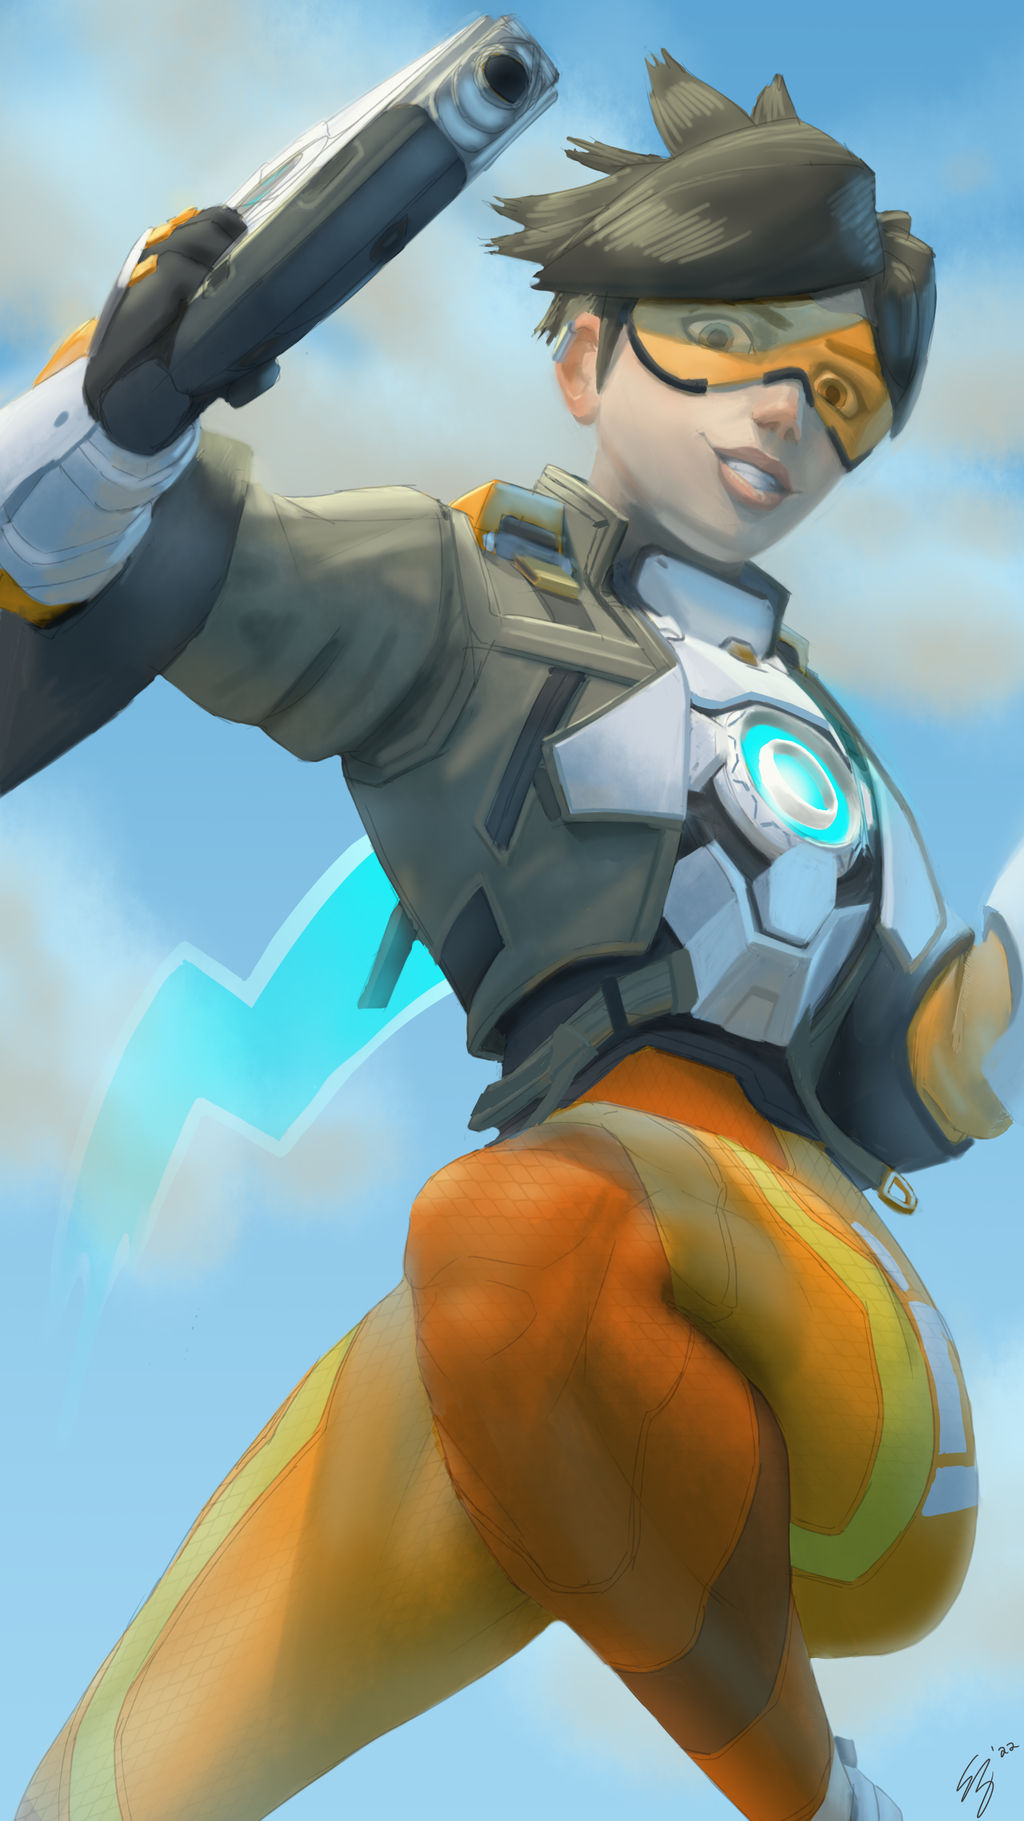 Tracer Overwatch 2 by Huy137 on DeviantArt